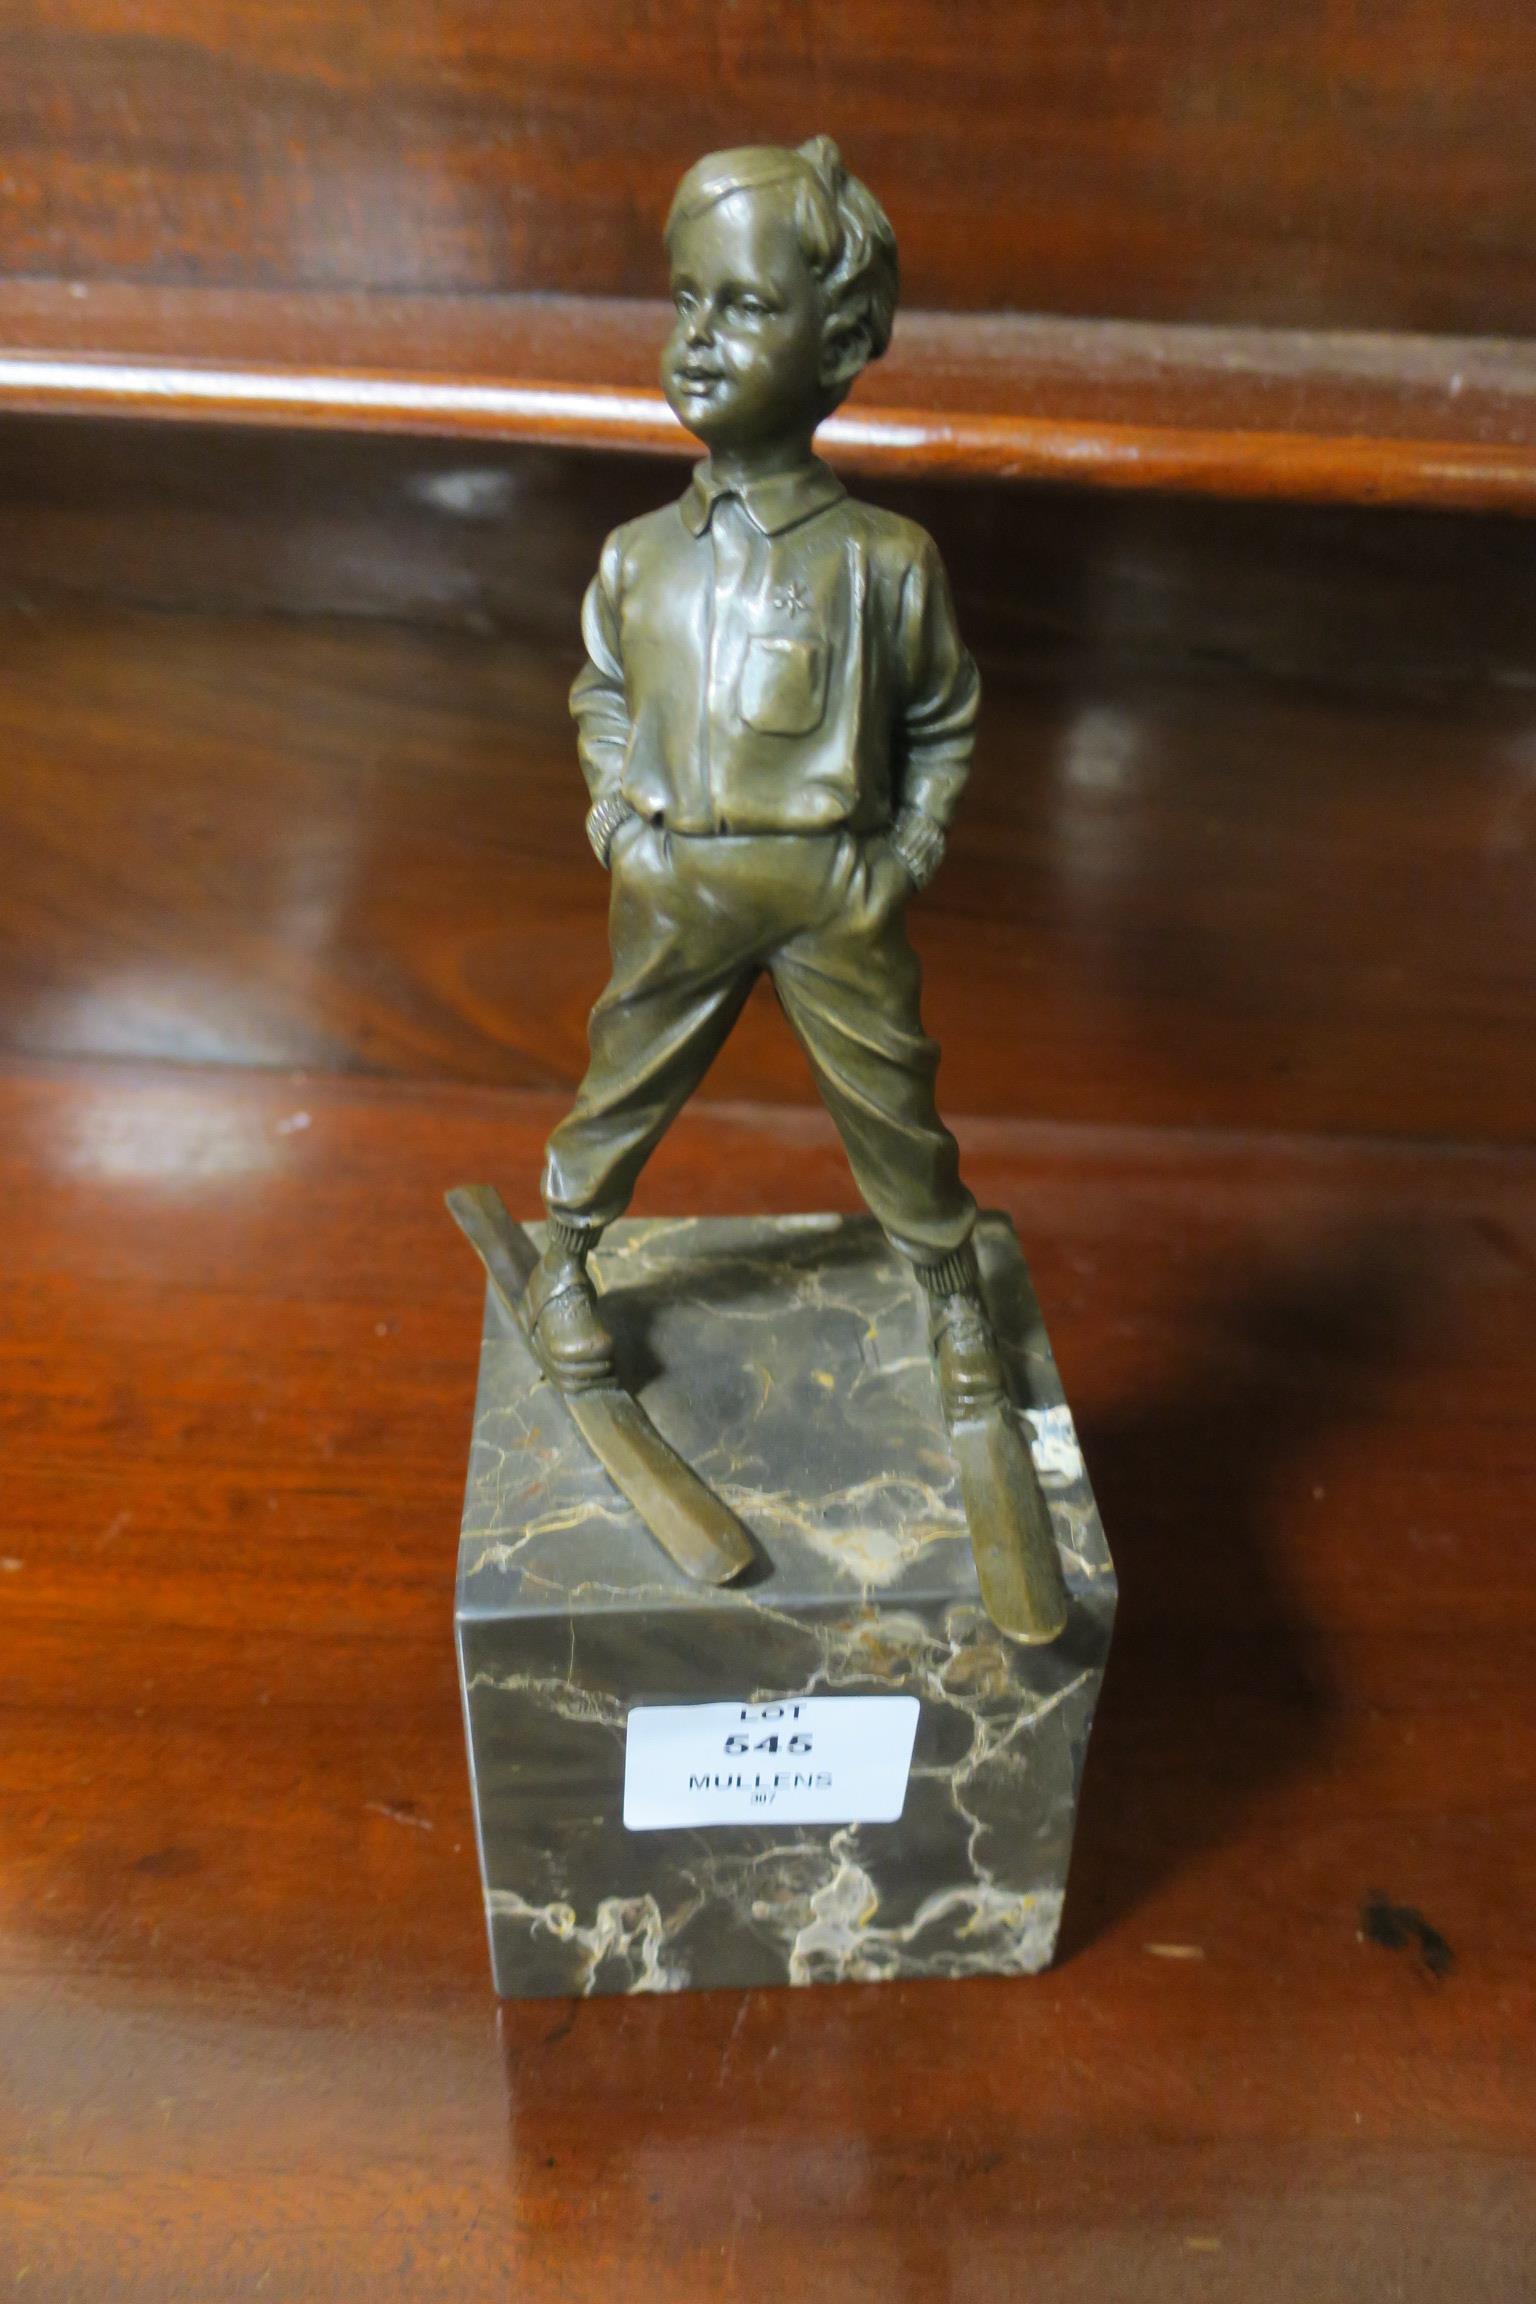 A BRONZED FIGURE modelled as a young boy skiing shown standing on a veined marble base 28cm